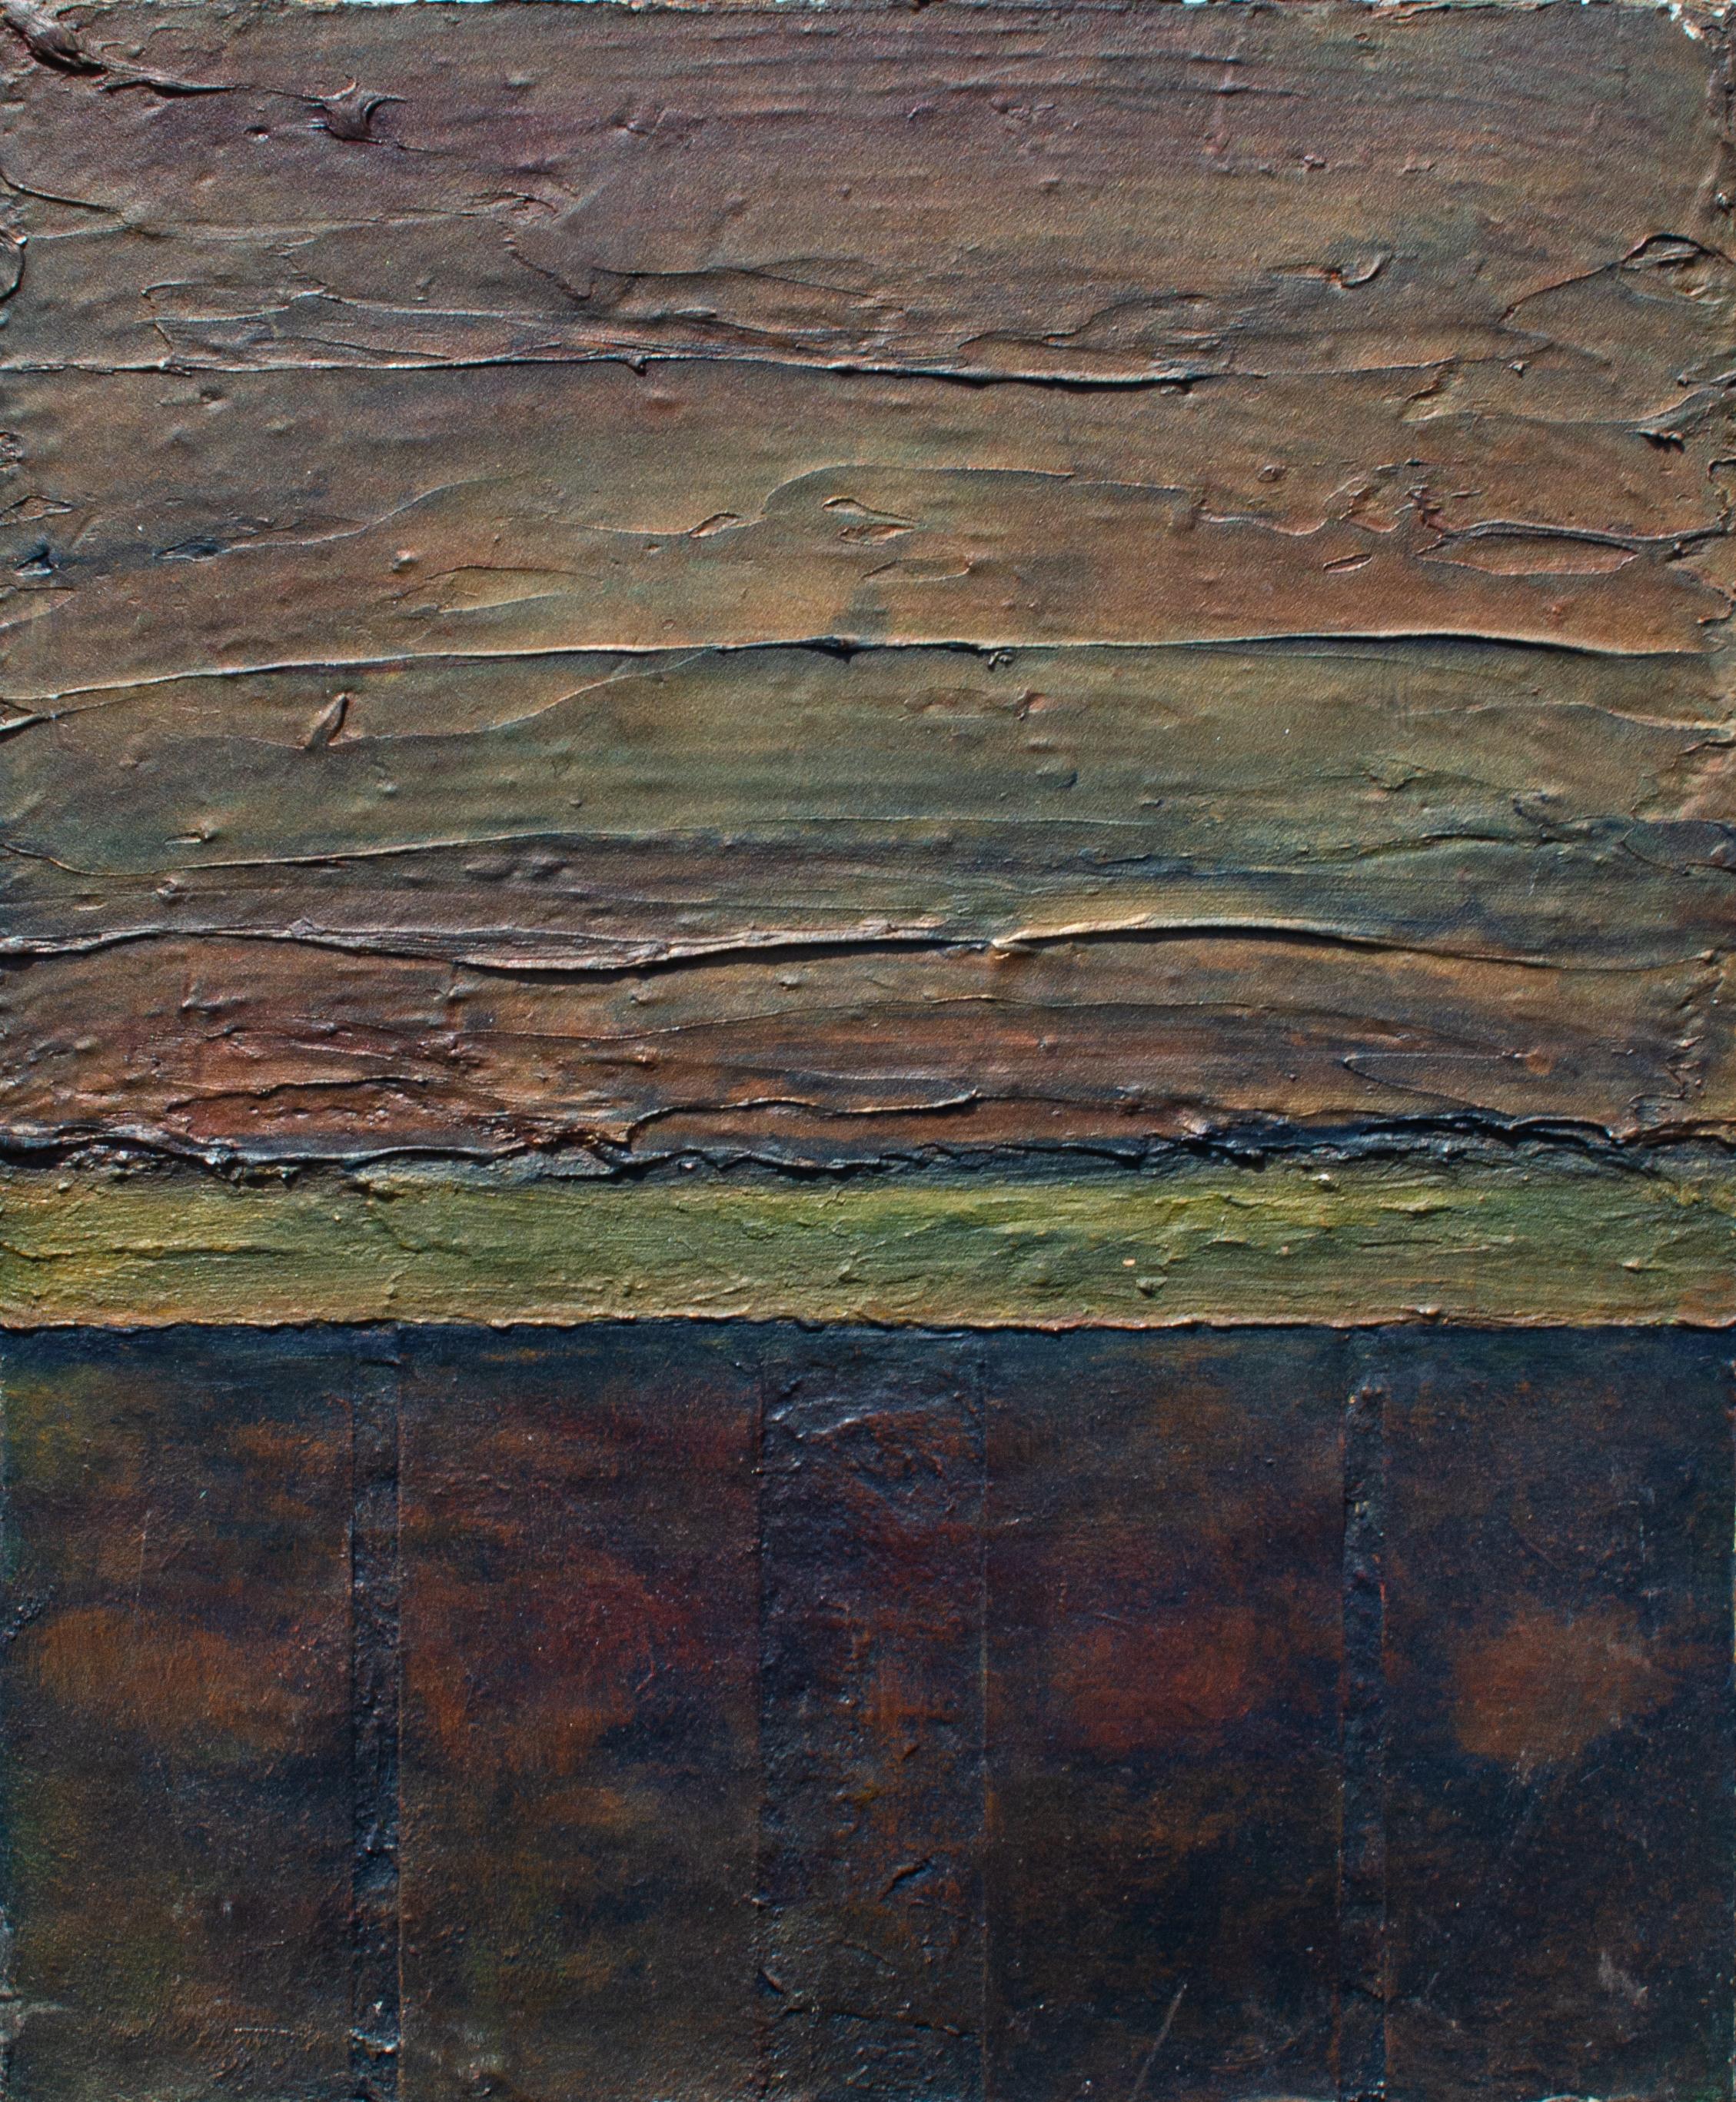 Bob Thomas (American, 1945-2018)
Altered Grounds #159, c. 2010
Mixed media on wood
24 x 20 x 1 in.

Robert “Bob” Thomas was an accomplished artist from Edgecomb known for his textured paintings of old walls in Beirut, Lebanon and his use of color to